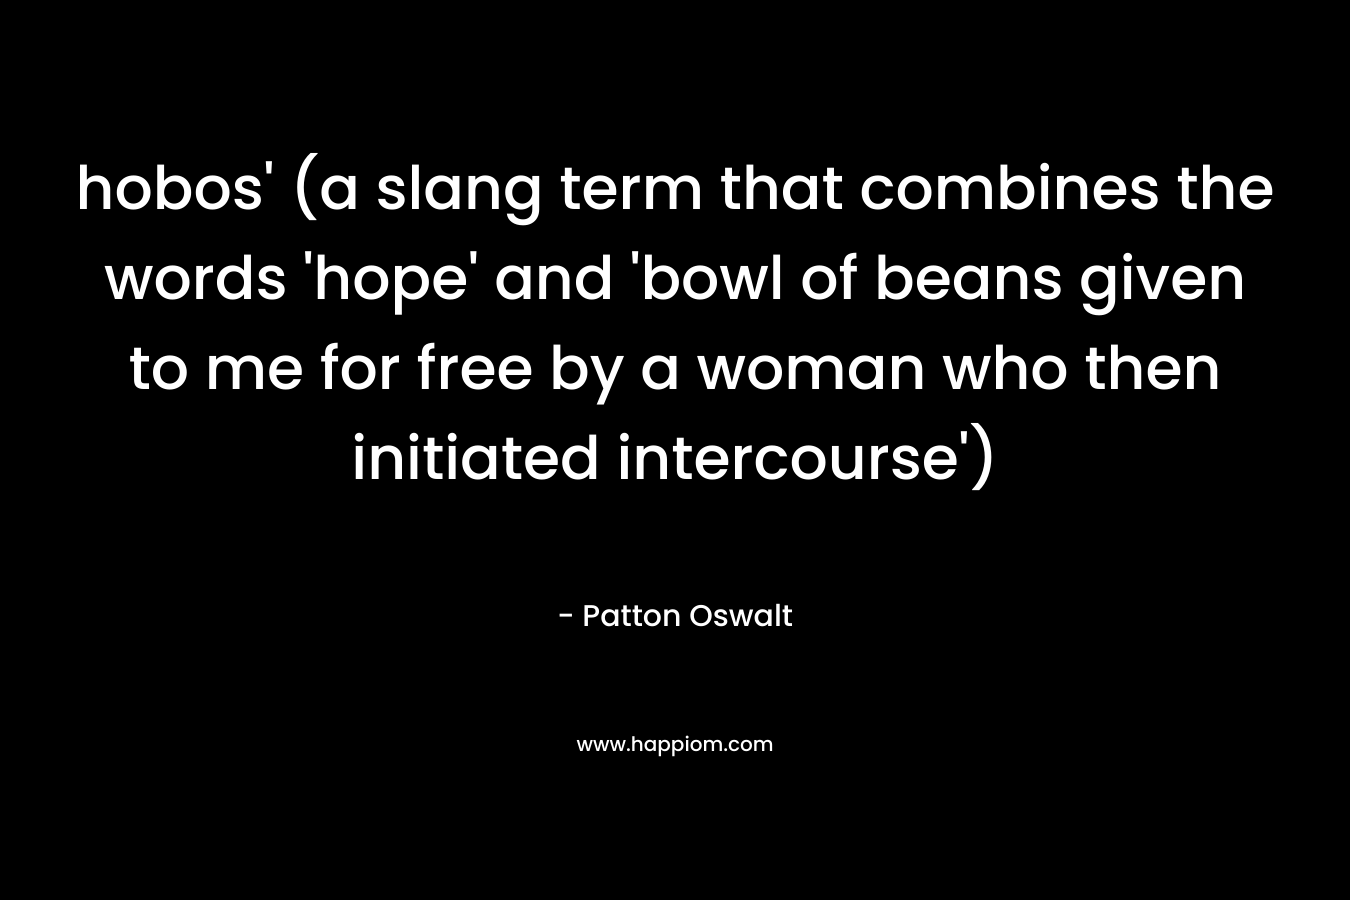 hobos' (a slang term that combines the words 'hope' and 'bowl of beans given to me for free by a woman who then initiated intercourse')